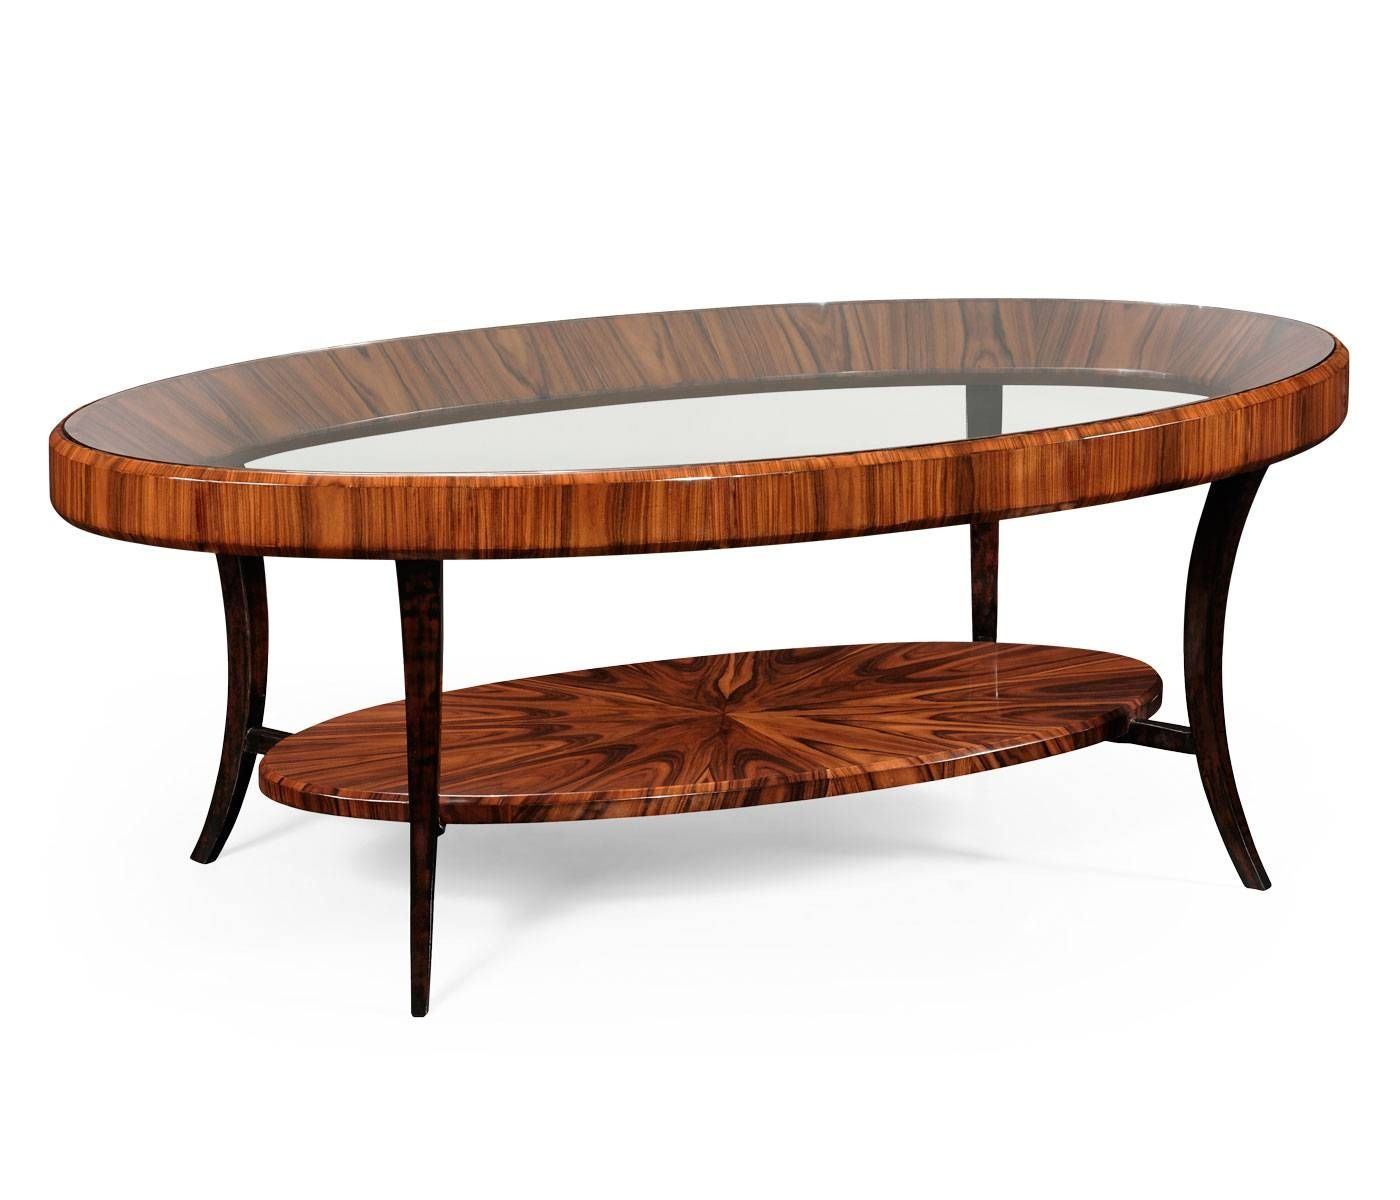 Deco Oval Coffee Table With Glass Top (high Lustre) With Regard To Art Coffee Tables (View 10 of 30)